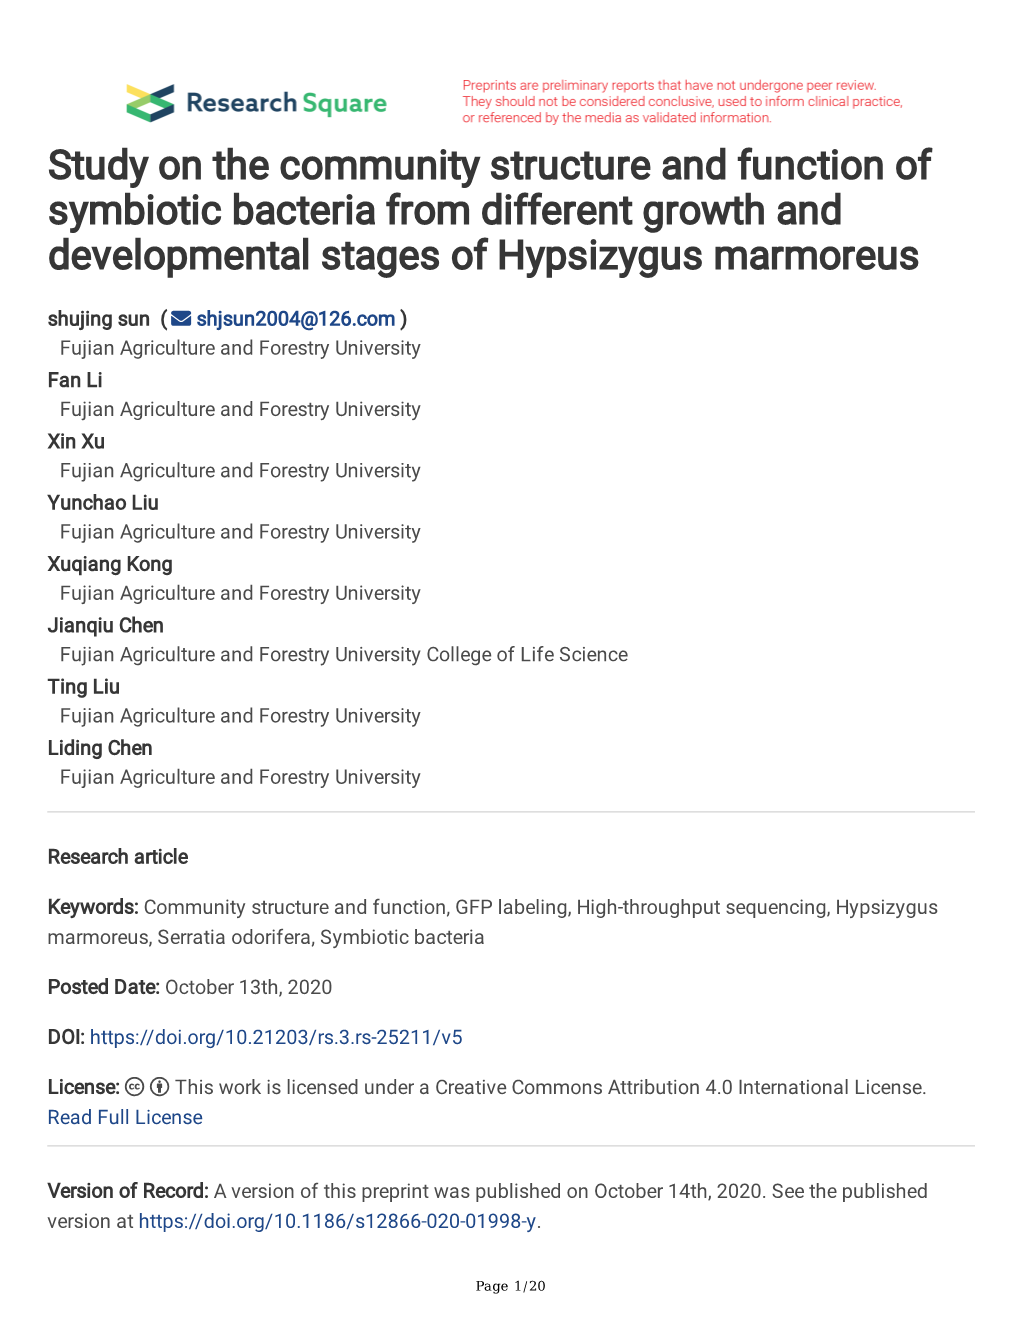 Study on the Community Structure and Function of Symbiotic Bacteria From